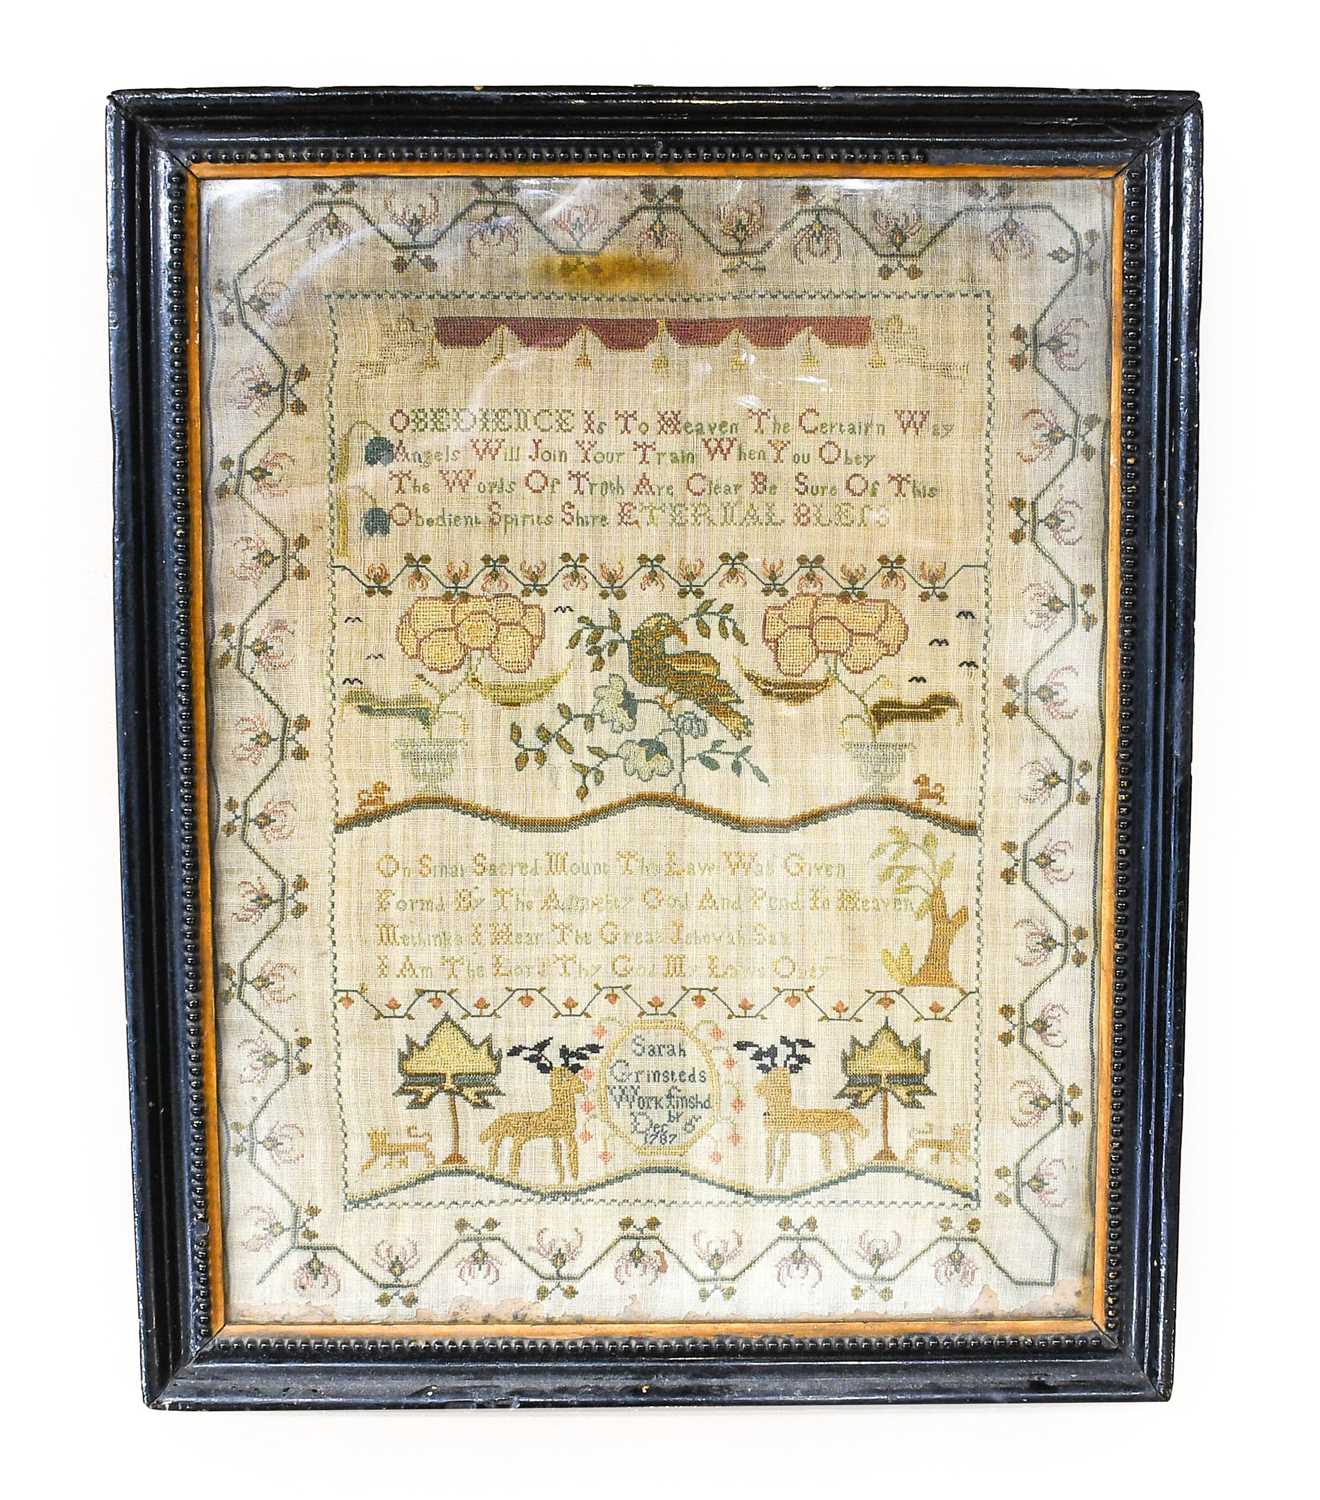 A Pictorial Sampler with Religious Verses Worked by Sarah Grinstead, Finished December 6 1787,